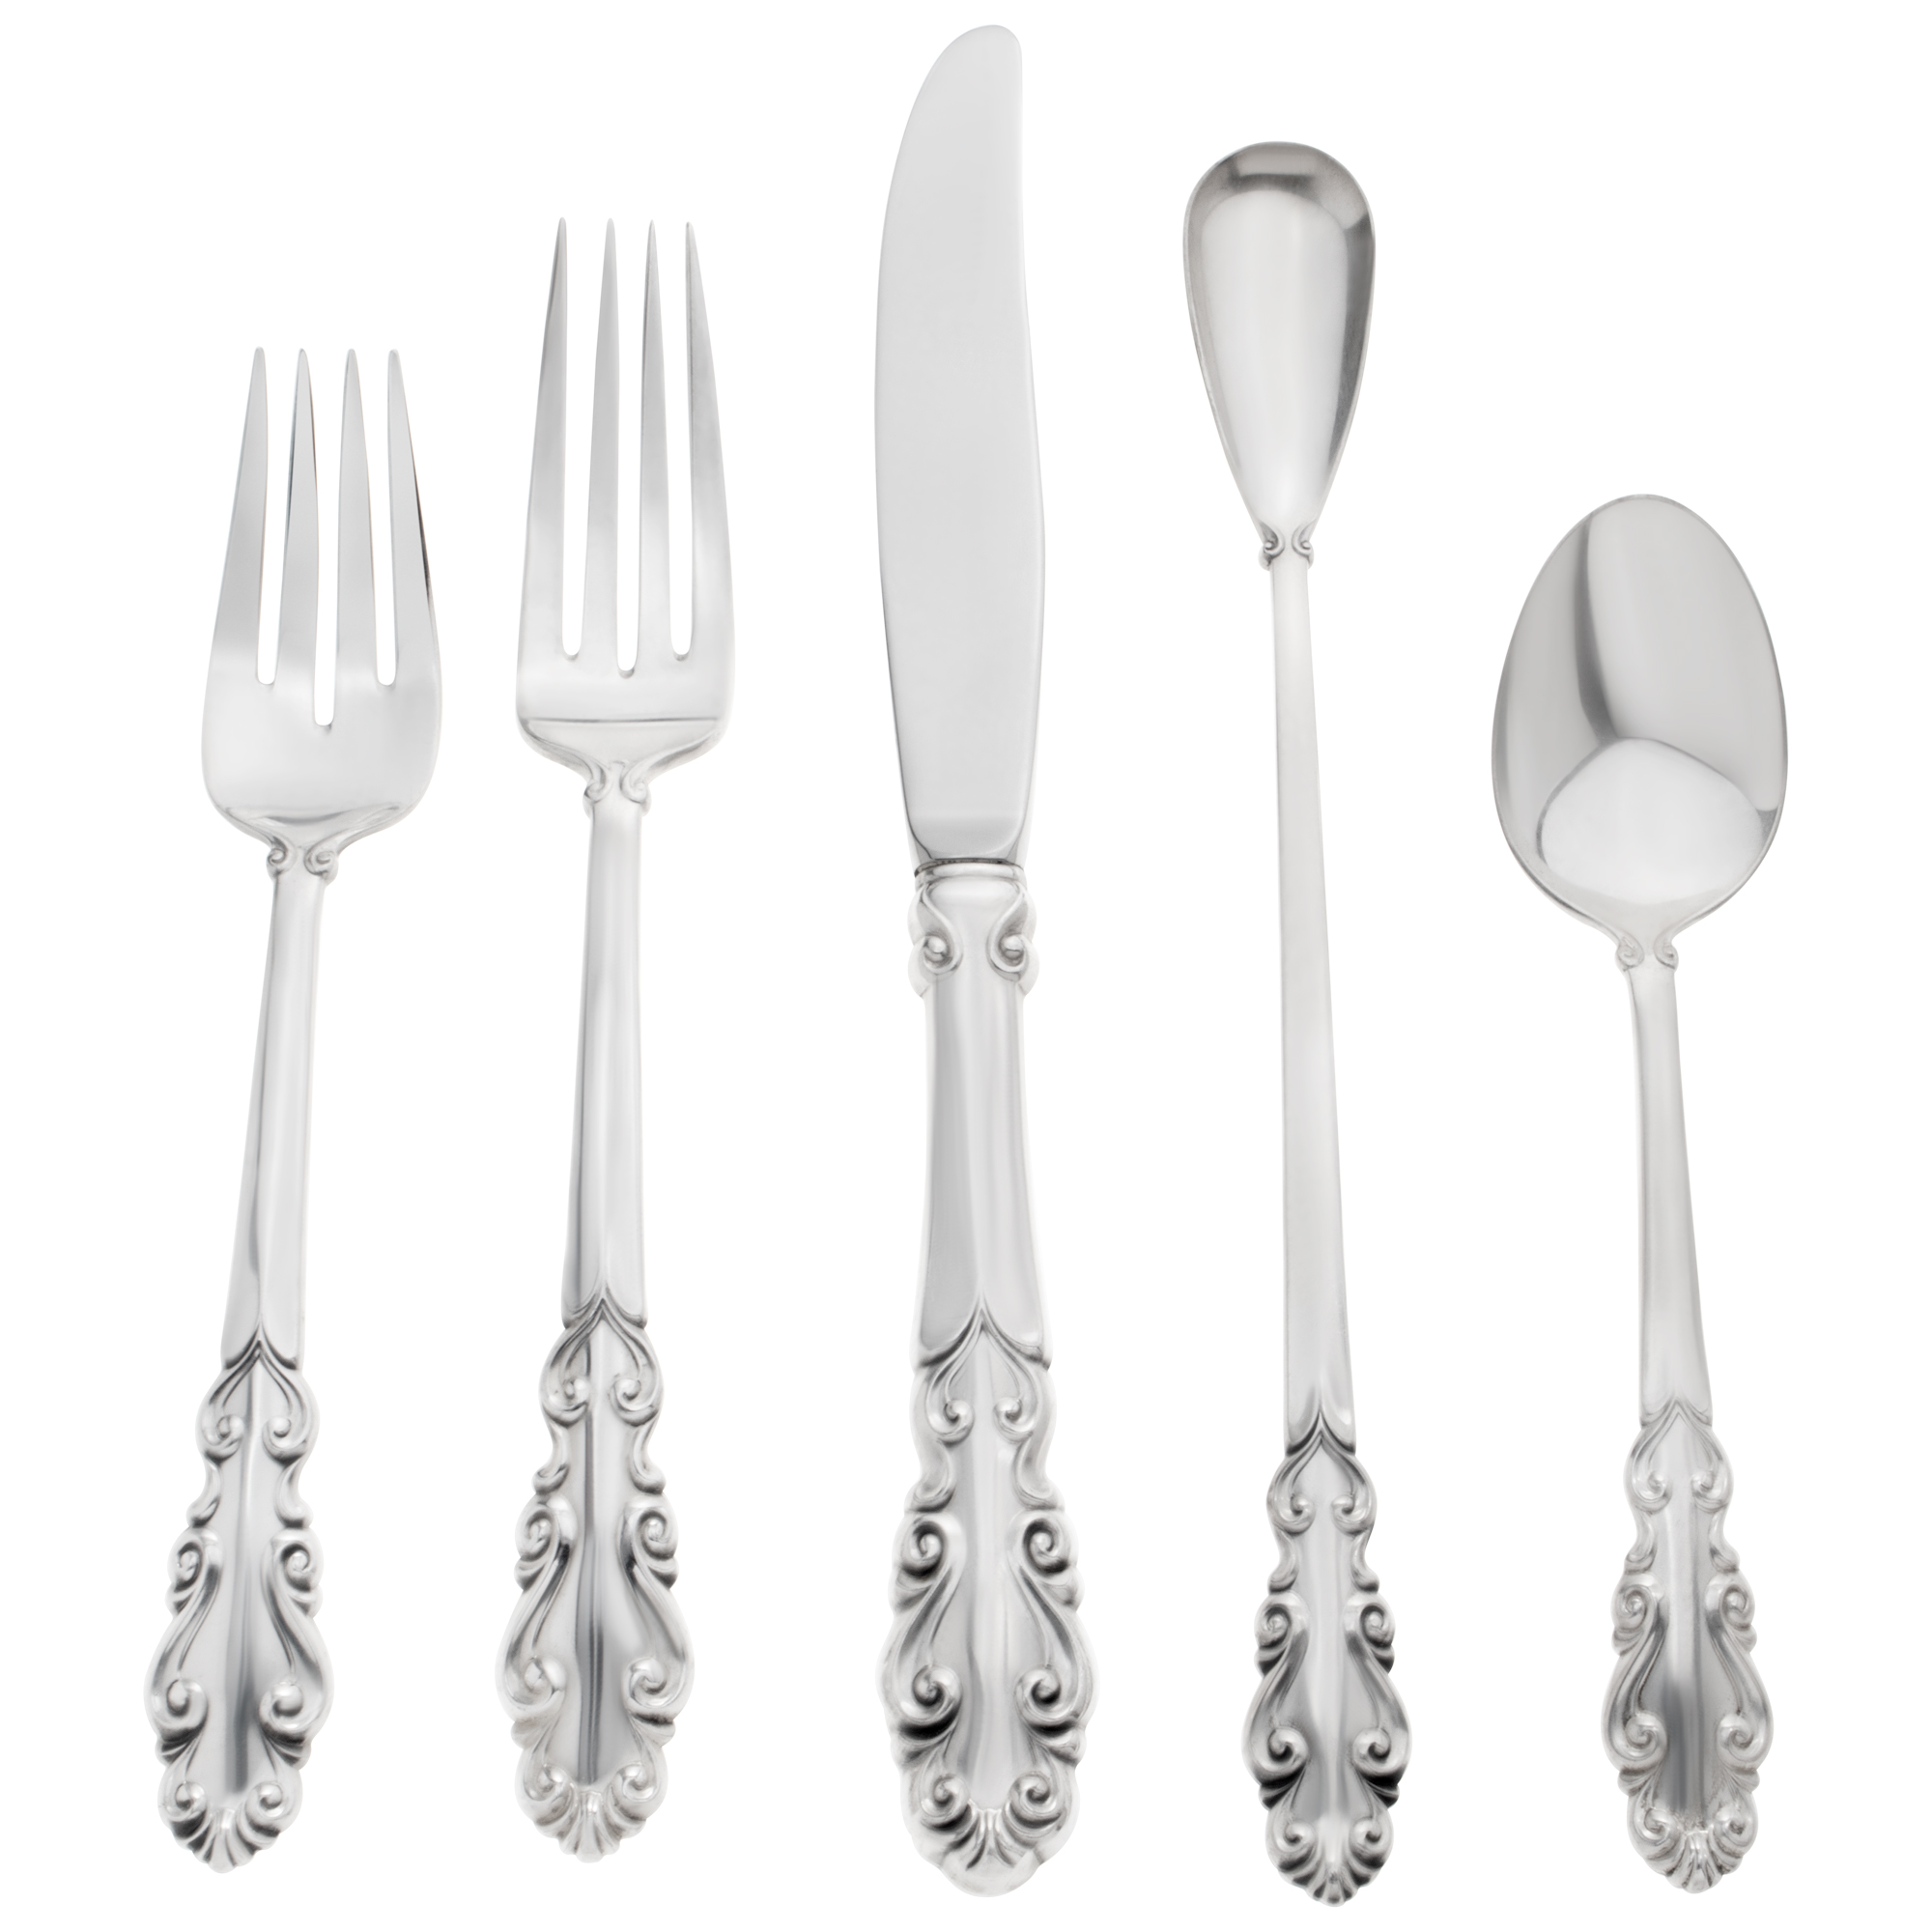 ESPLANADE Sterling silver flatware set patented in 1952 by Towle Silversmiths. 5 place settings for 12-. 66 Pieces total. image 2